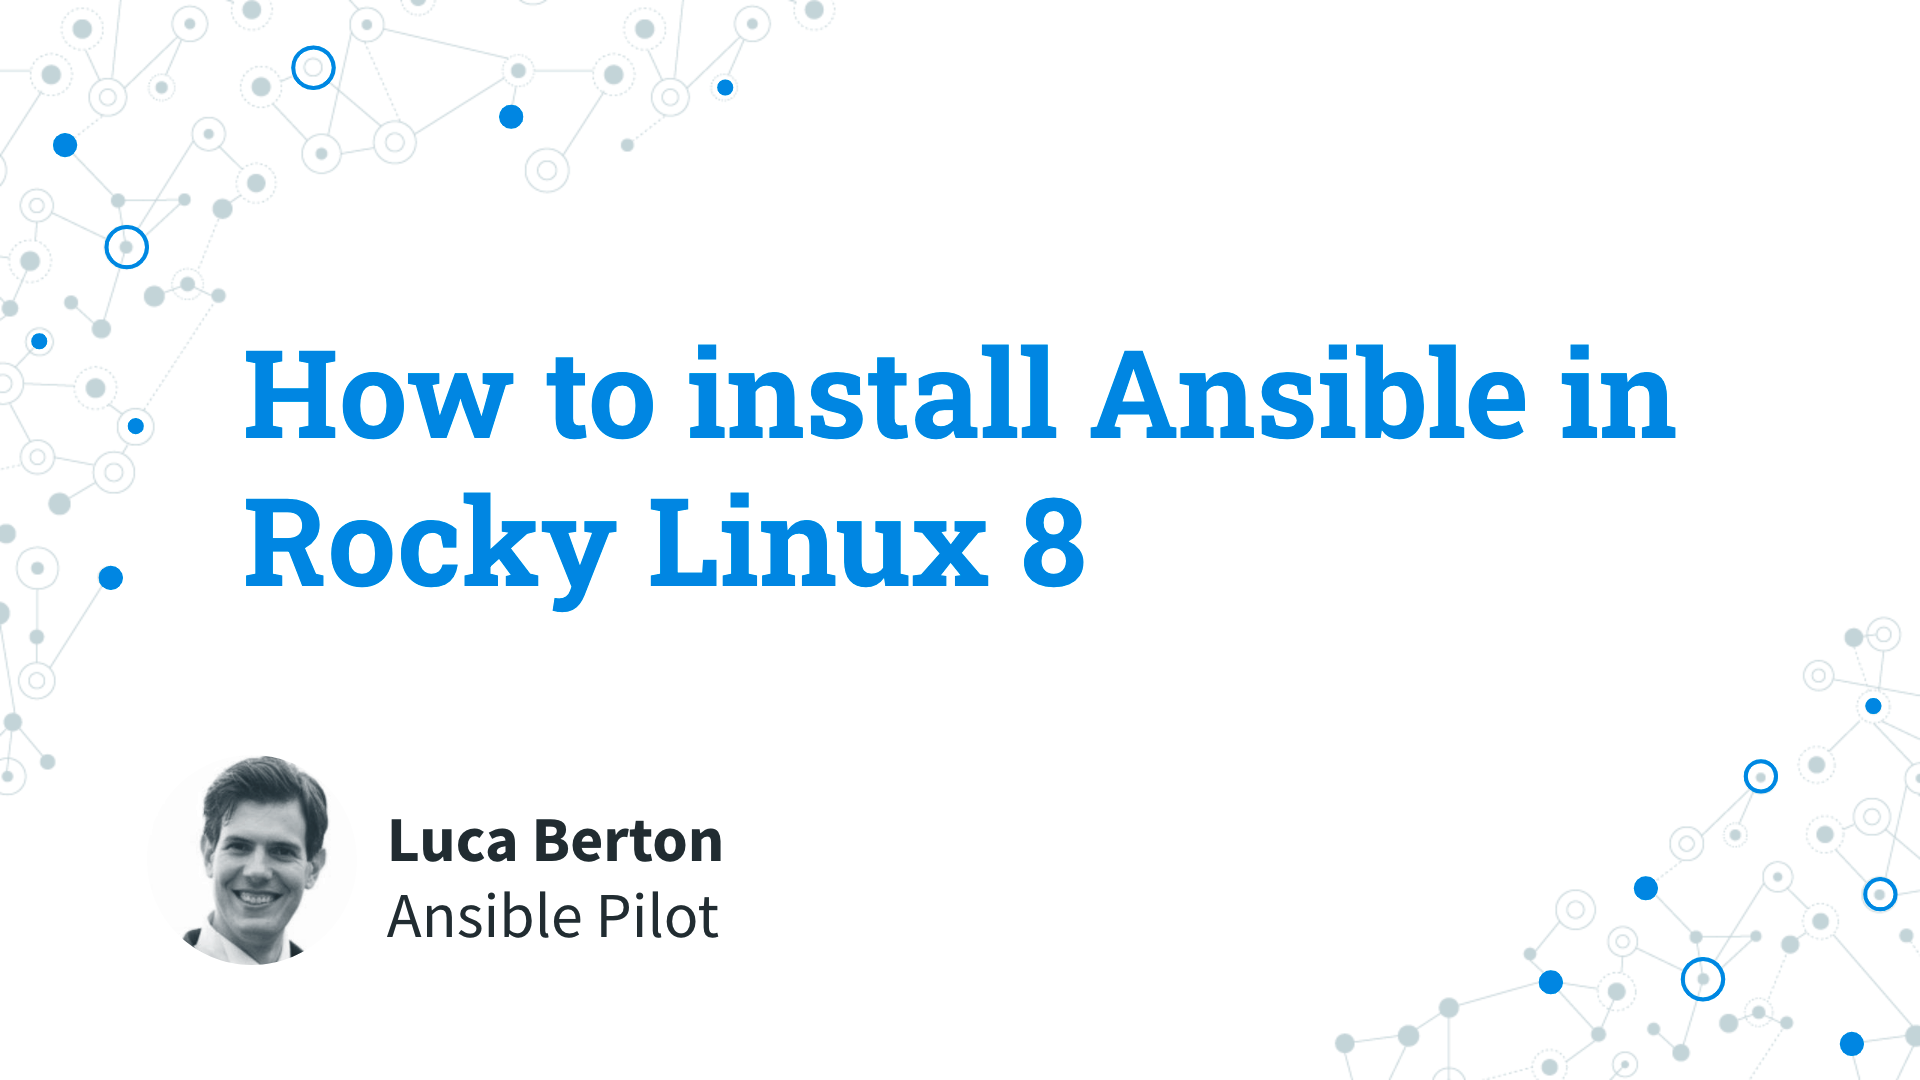 How to install Ansible in Rocky Linux 8 - Ansible install